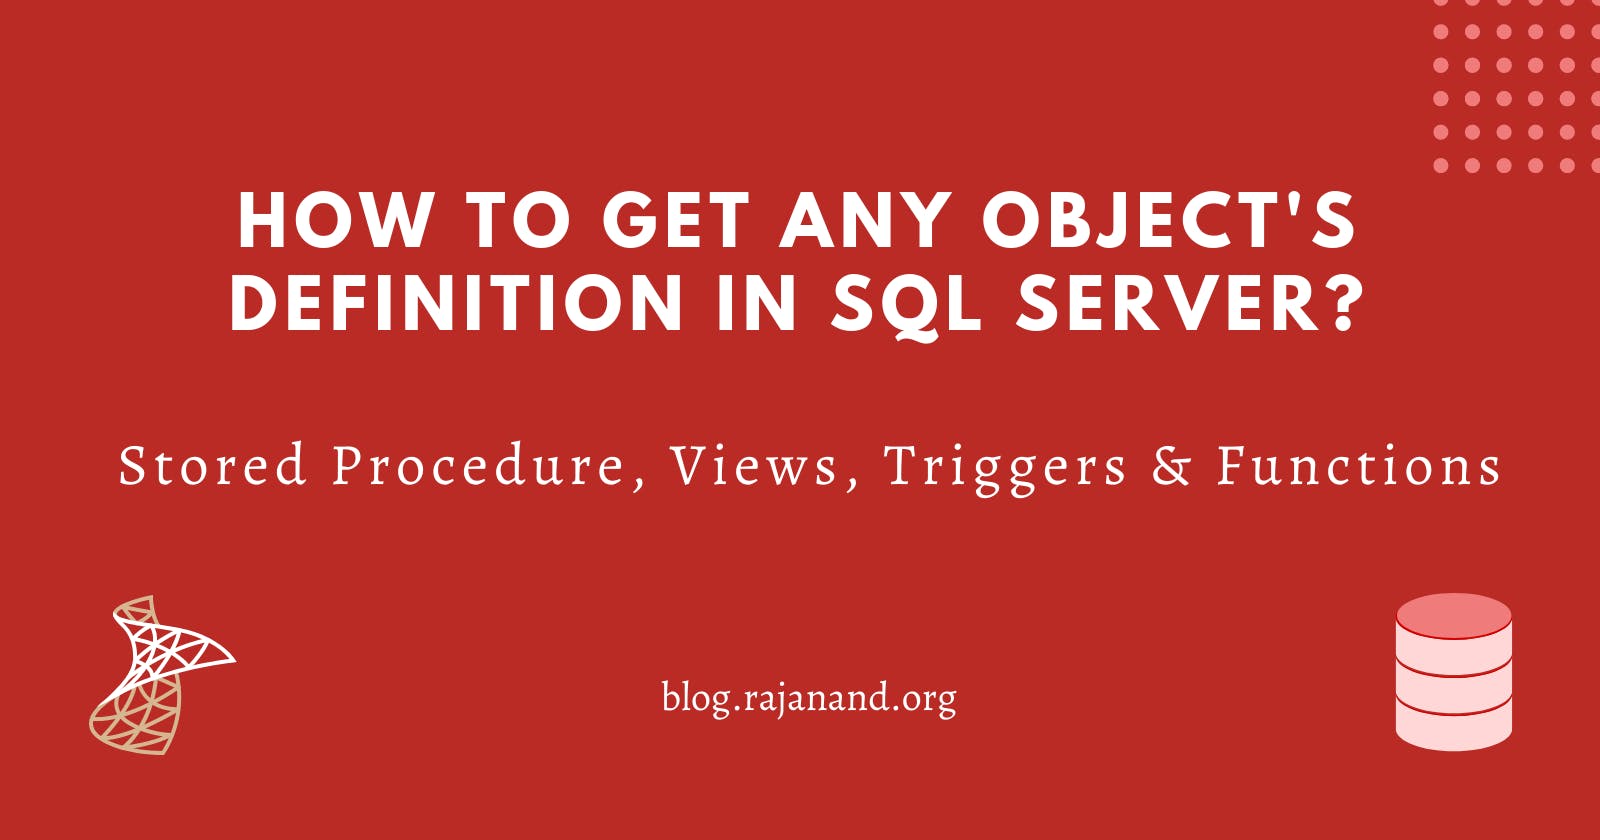 How to get any object's definition in SQL Server?